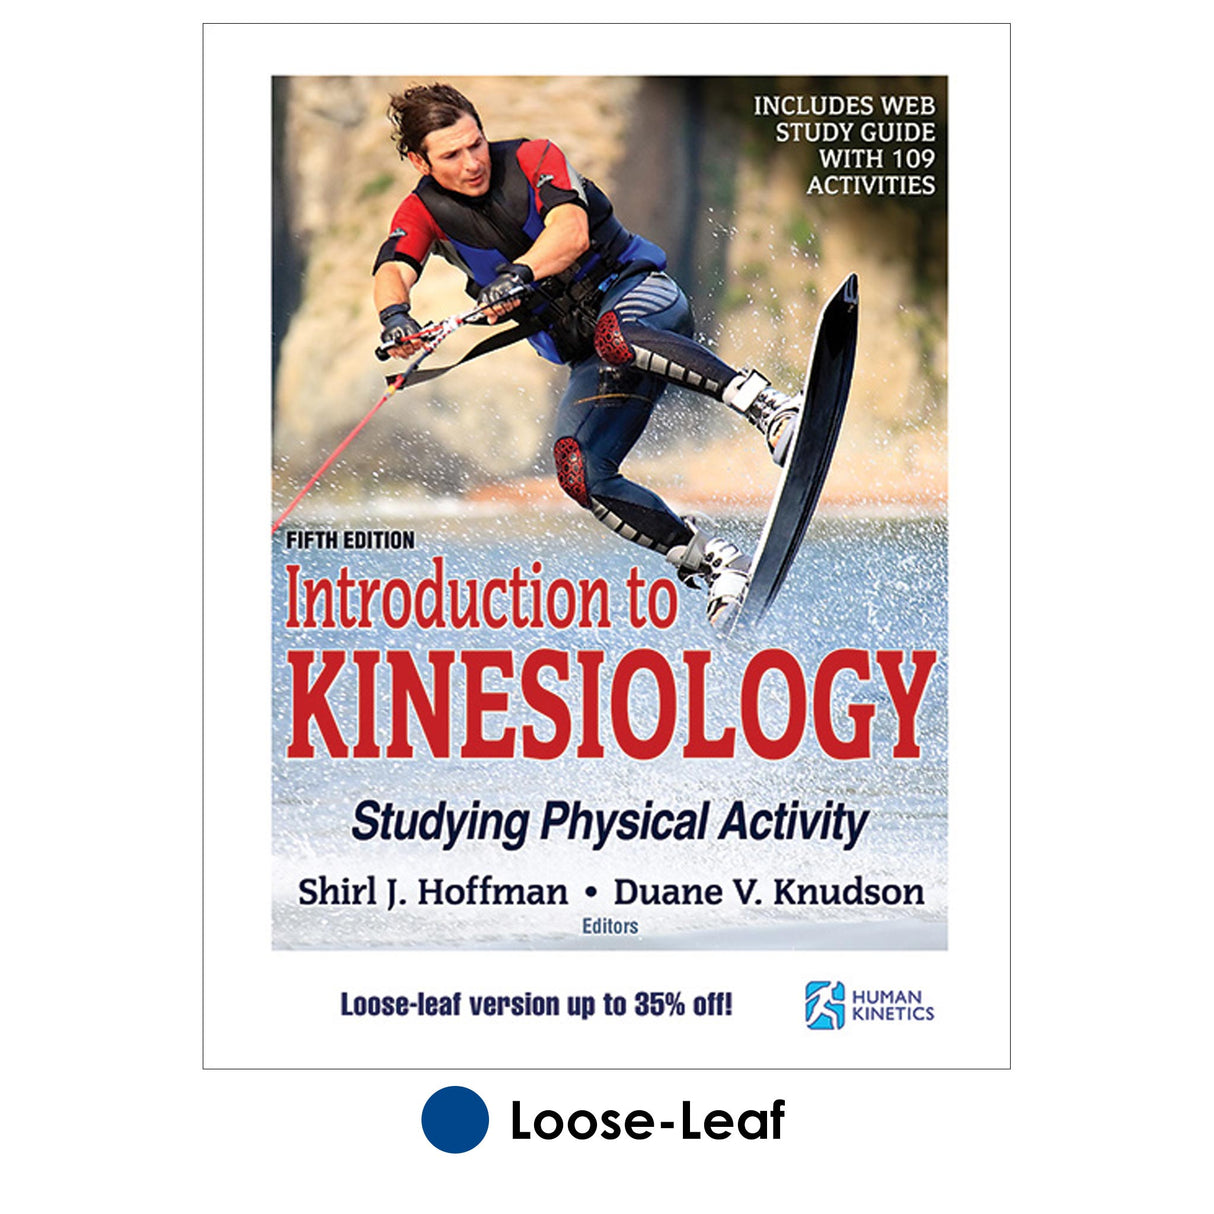 Introduction to Kinesiology 5th Edition With Web Study Guide Loose-Leaf Edition